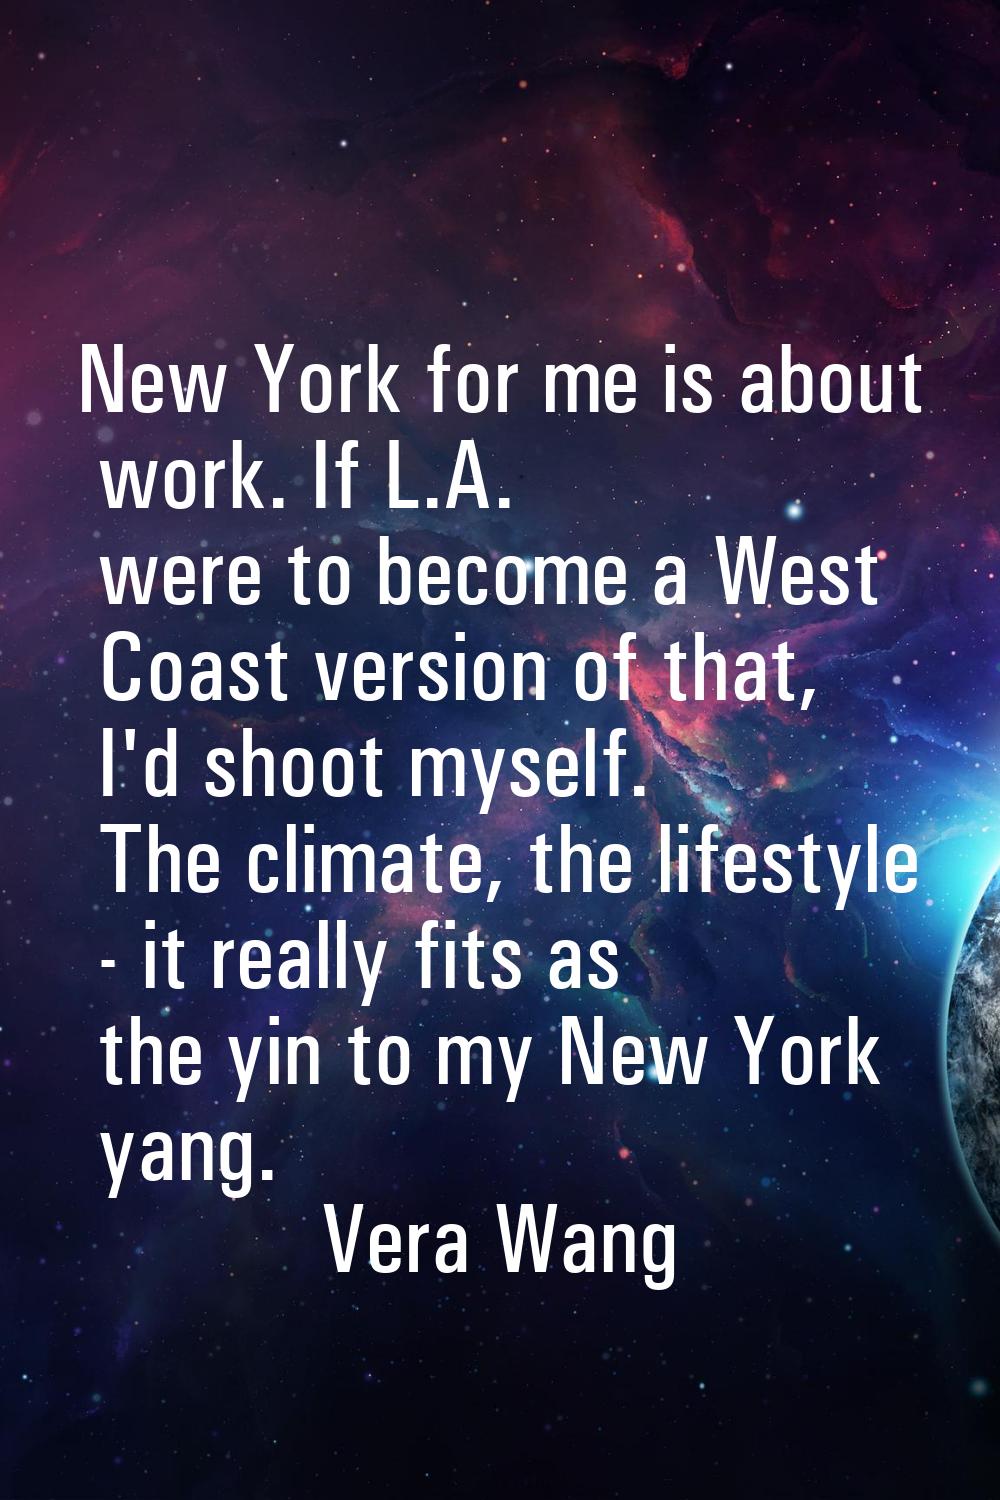 New York for me is about work. If L.A. were to become a West Coast version of that, I'd shoot mysel